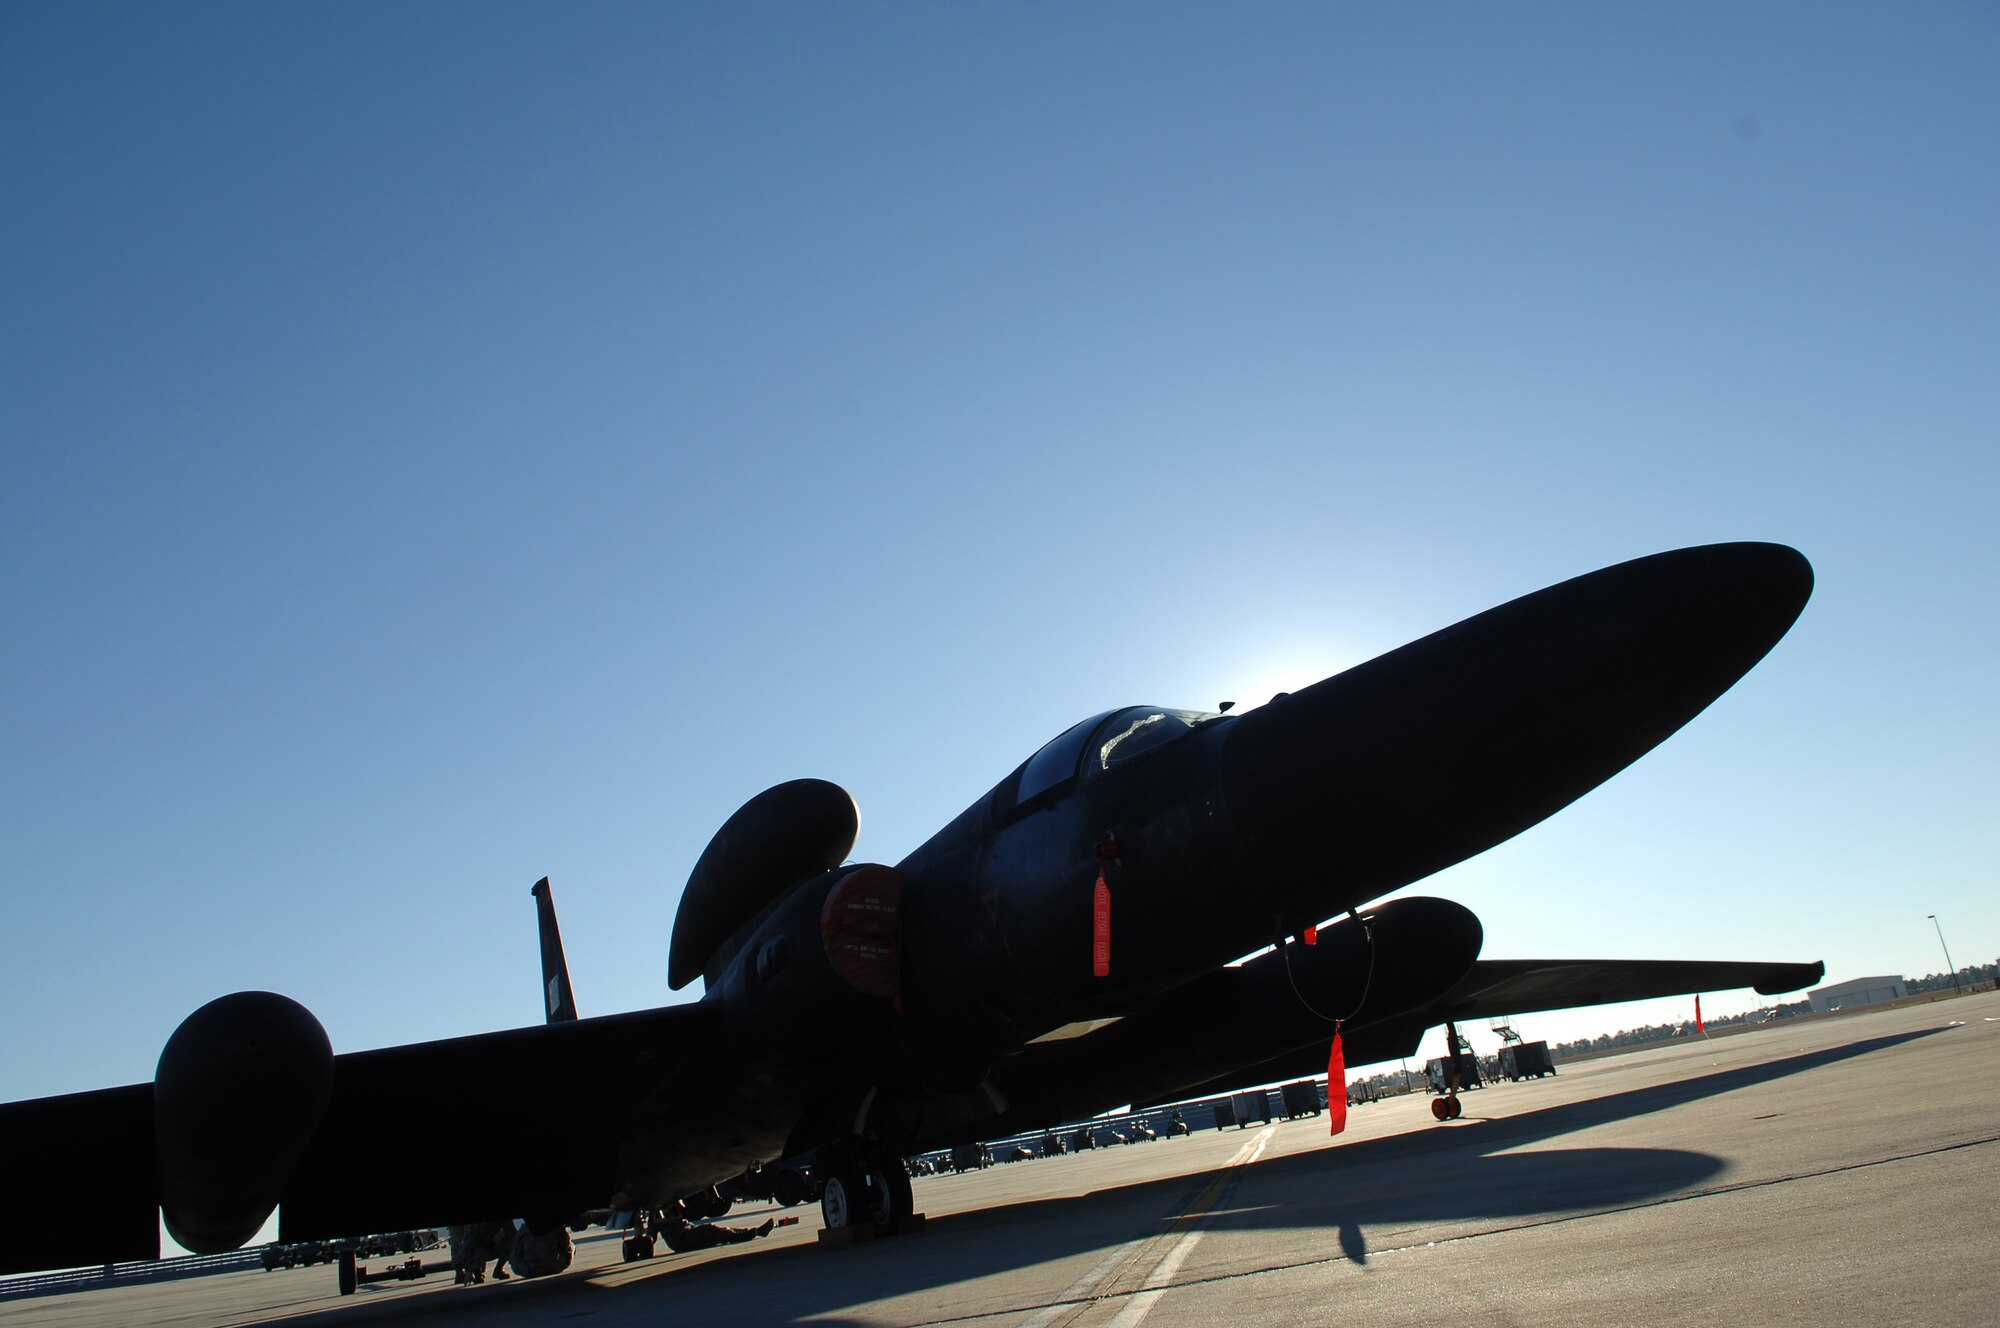 The U-2S is a high altitude, multi-intelligence reconnaissance aircraft. It can fly above 70,000 feet and provide near real-time imagery and intelligence to warfighters. (U. S. Air Force Photo by Ray Crayton)